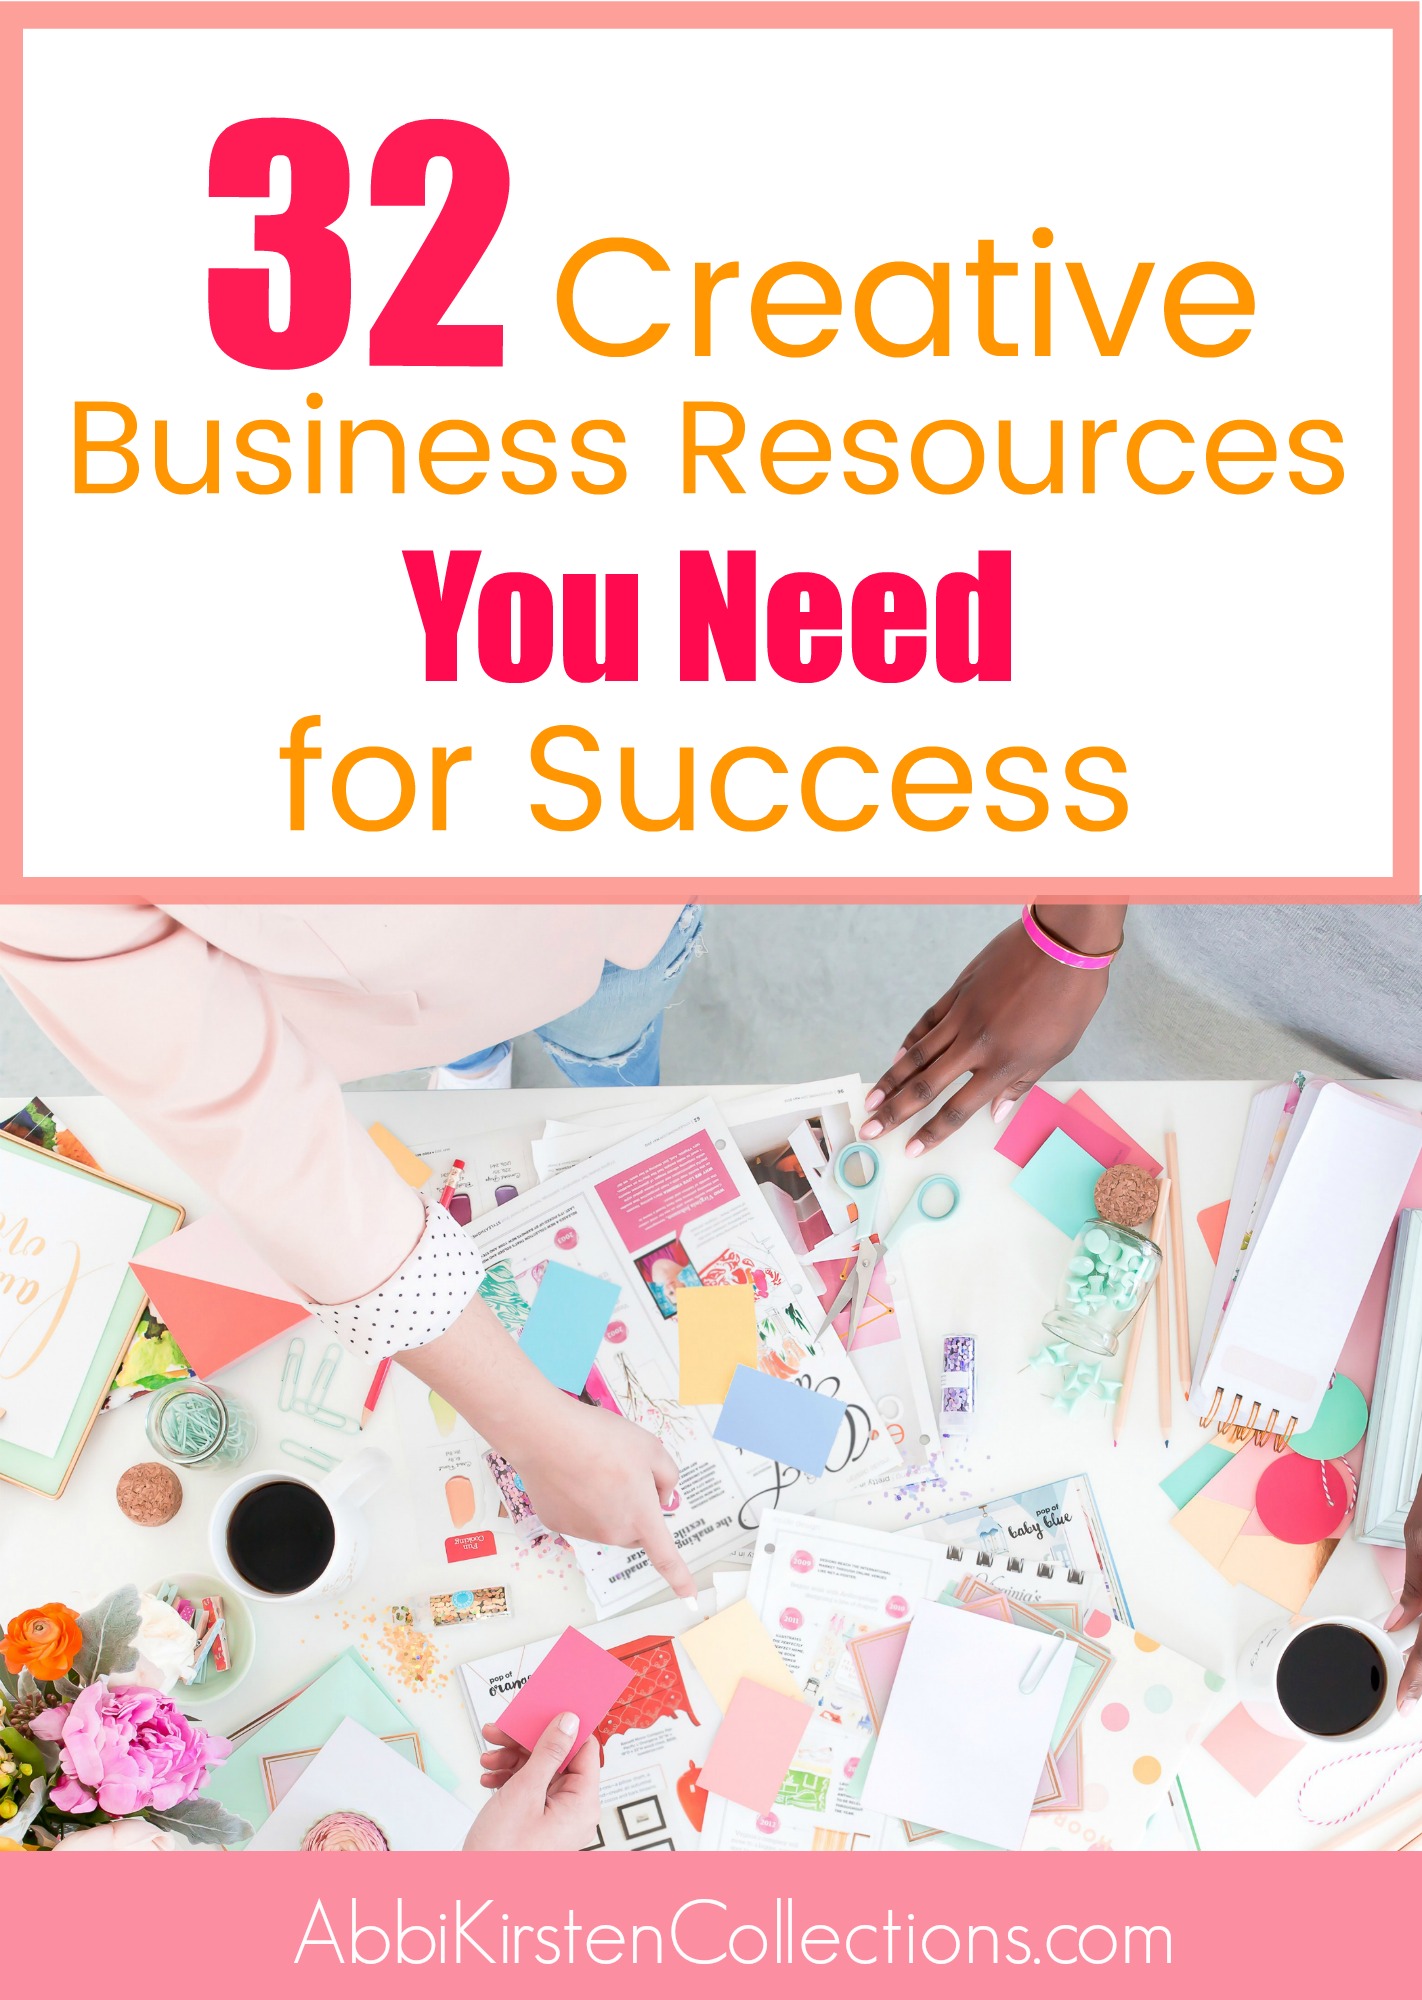 Starting a Home Craft Business: Learn how to build a successful small handmade or creative business from home with these top small business resources.